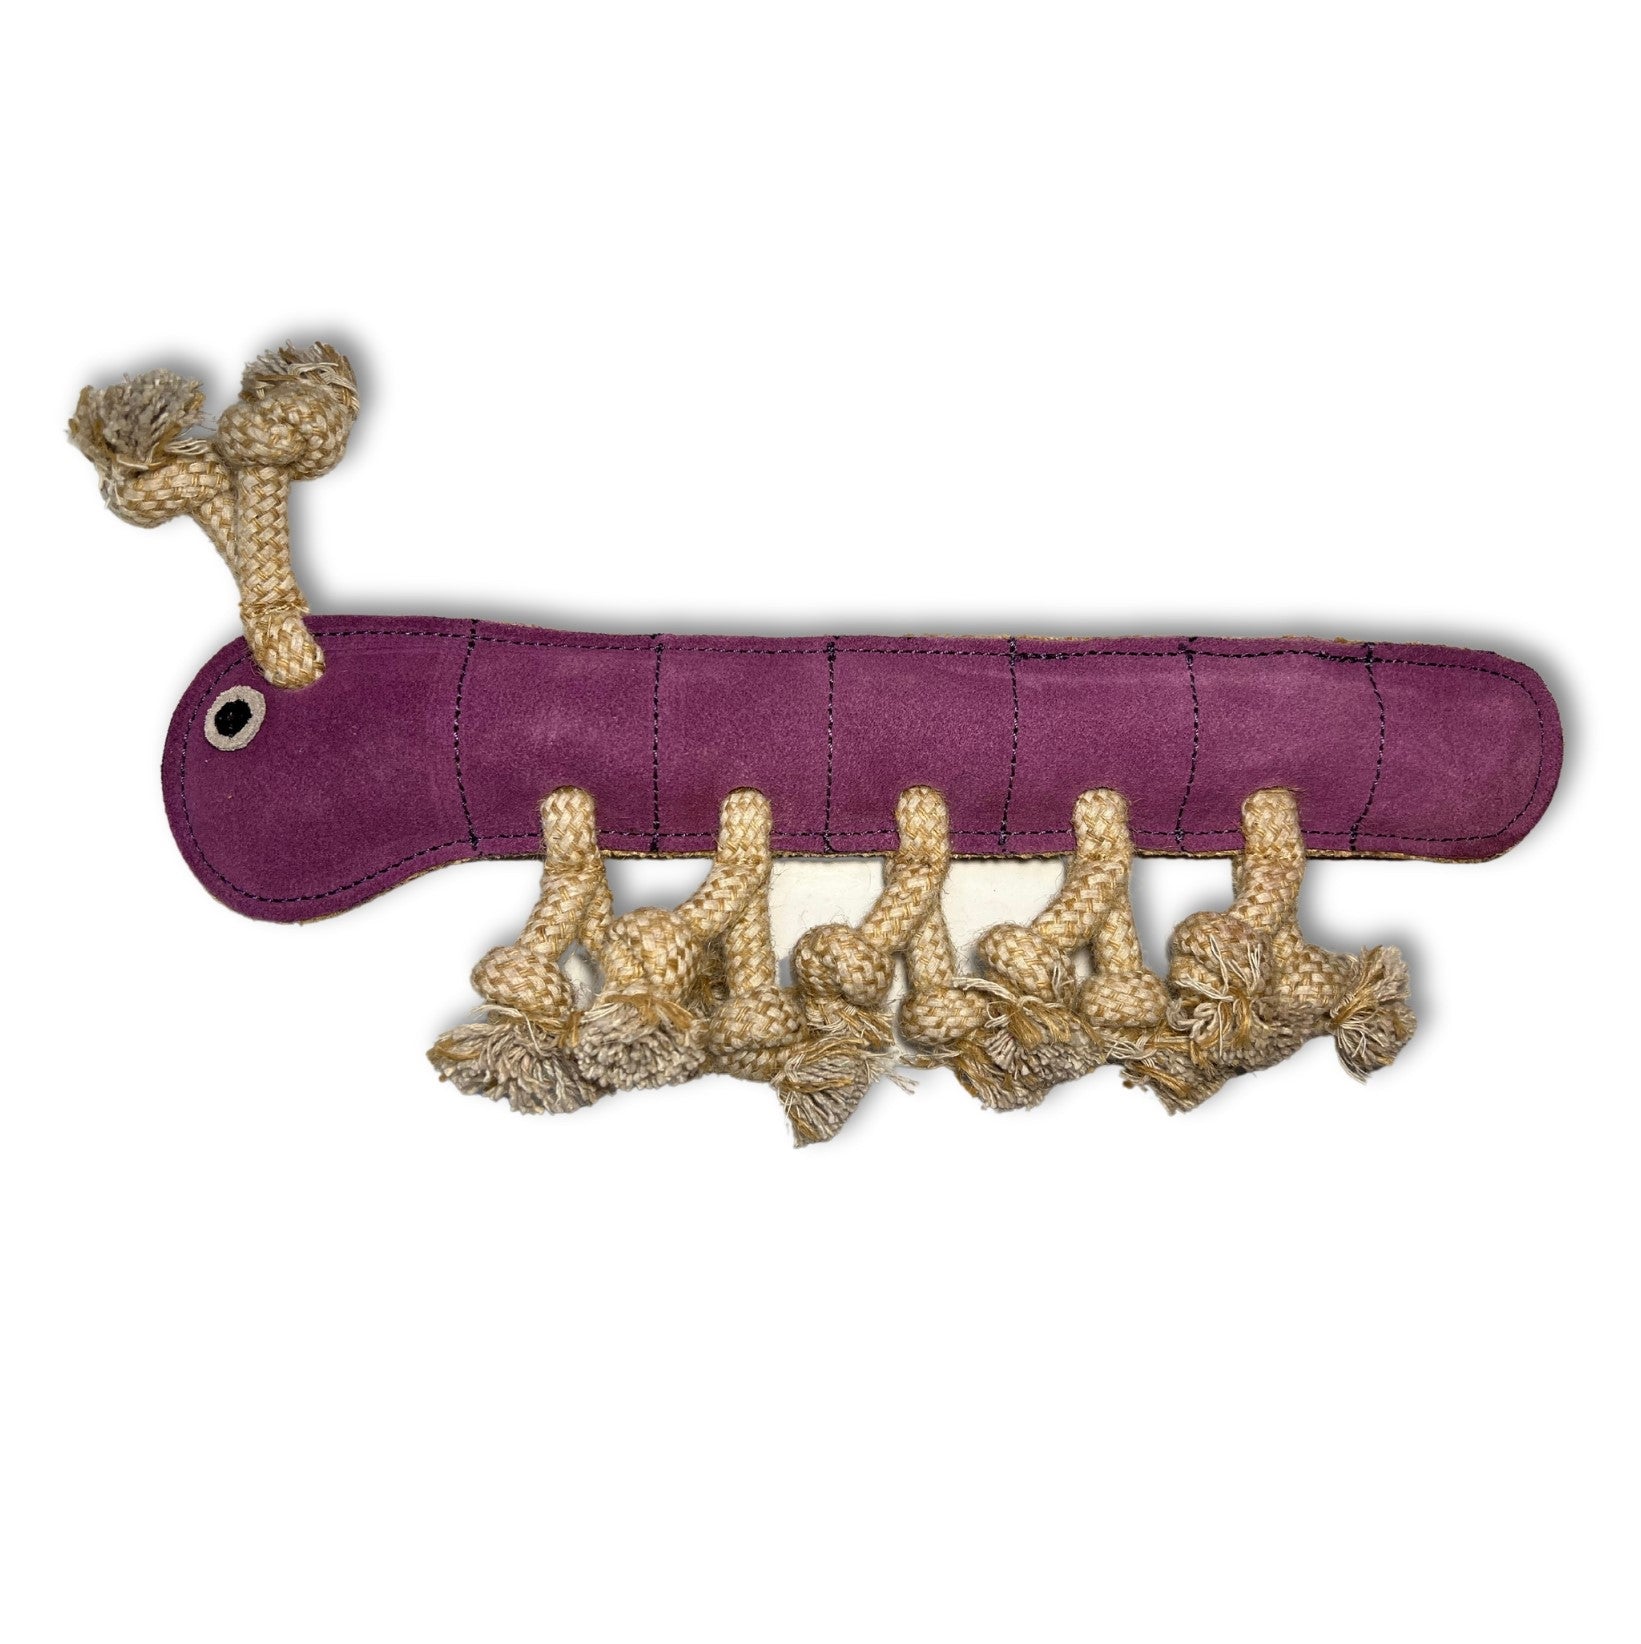 A purple sustainable buffalo leather and rope dog toy shaped like Gerti the Grub. It features a plush body with stitched segments, several knotted rope legs protruding from each side, and a playful rope tail by Georgie Paws.